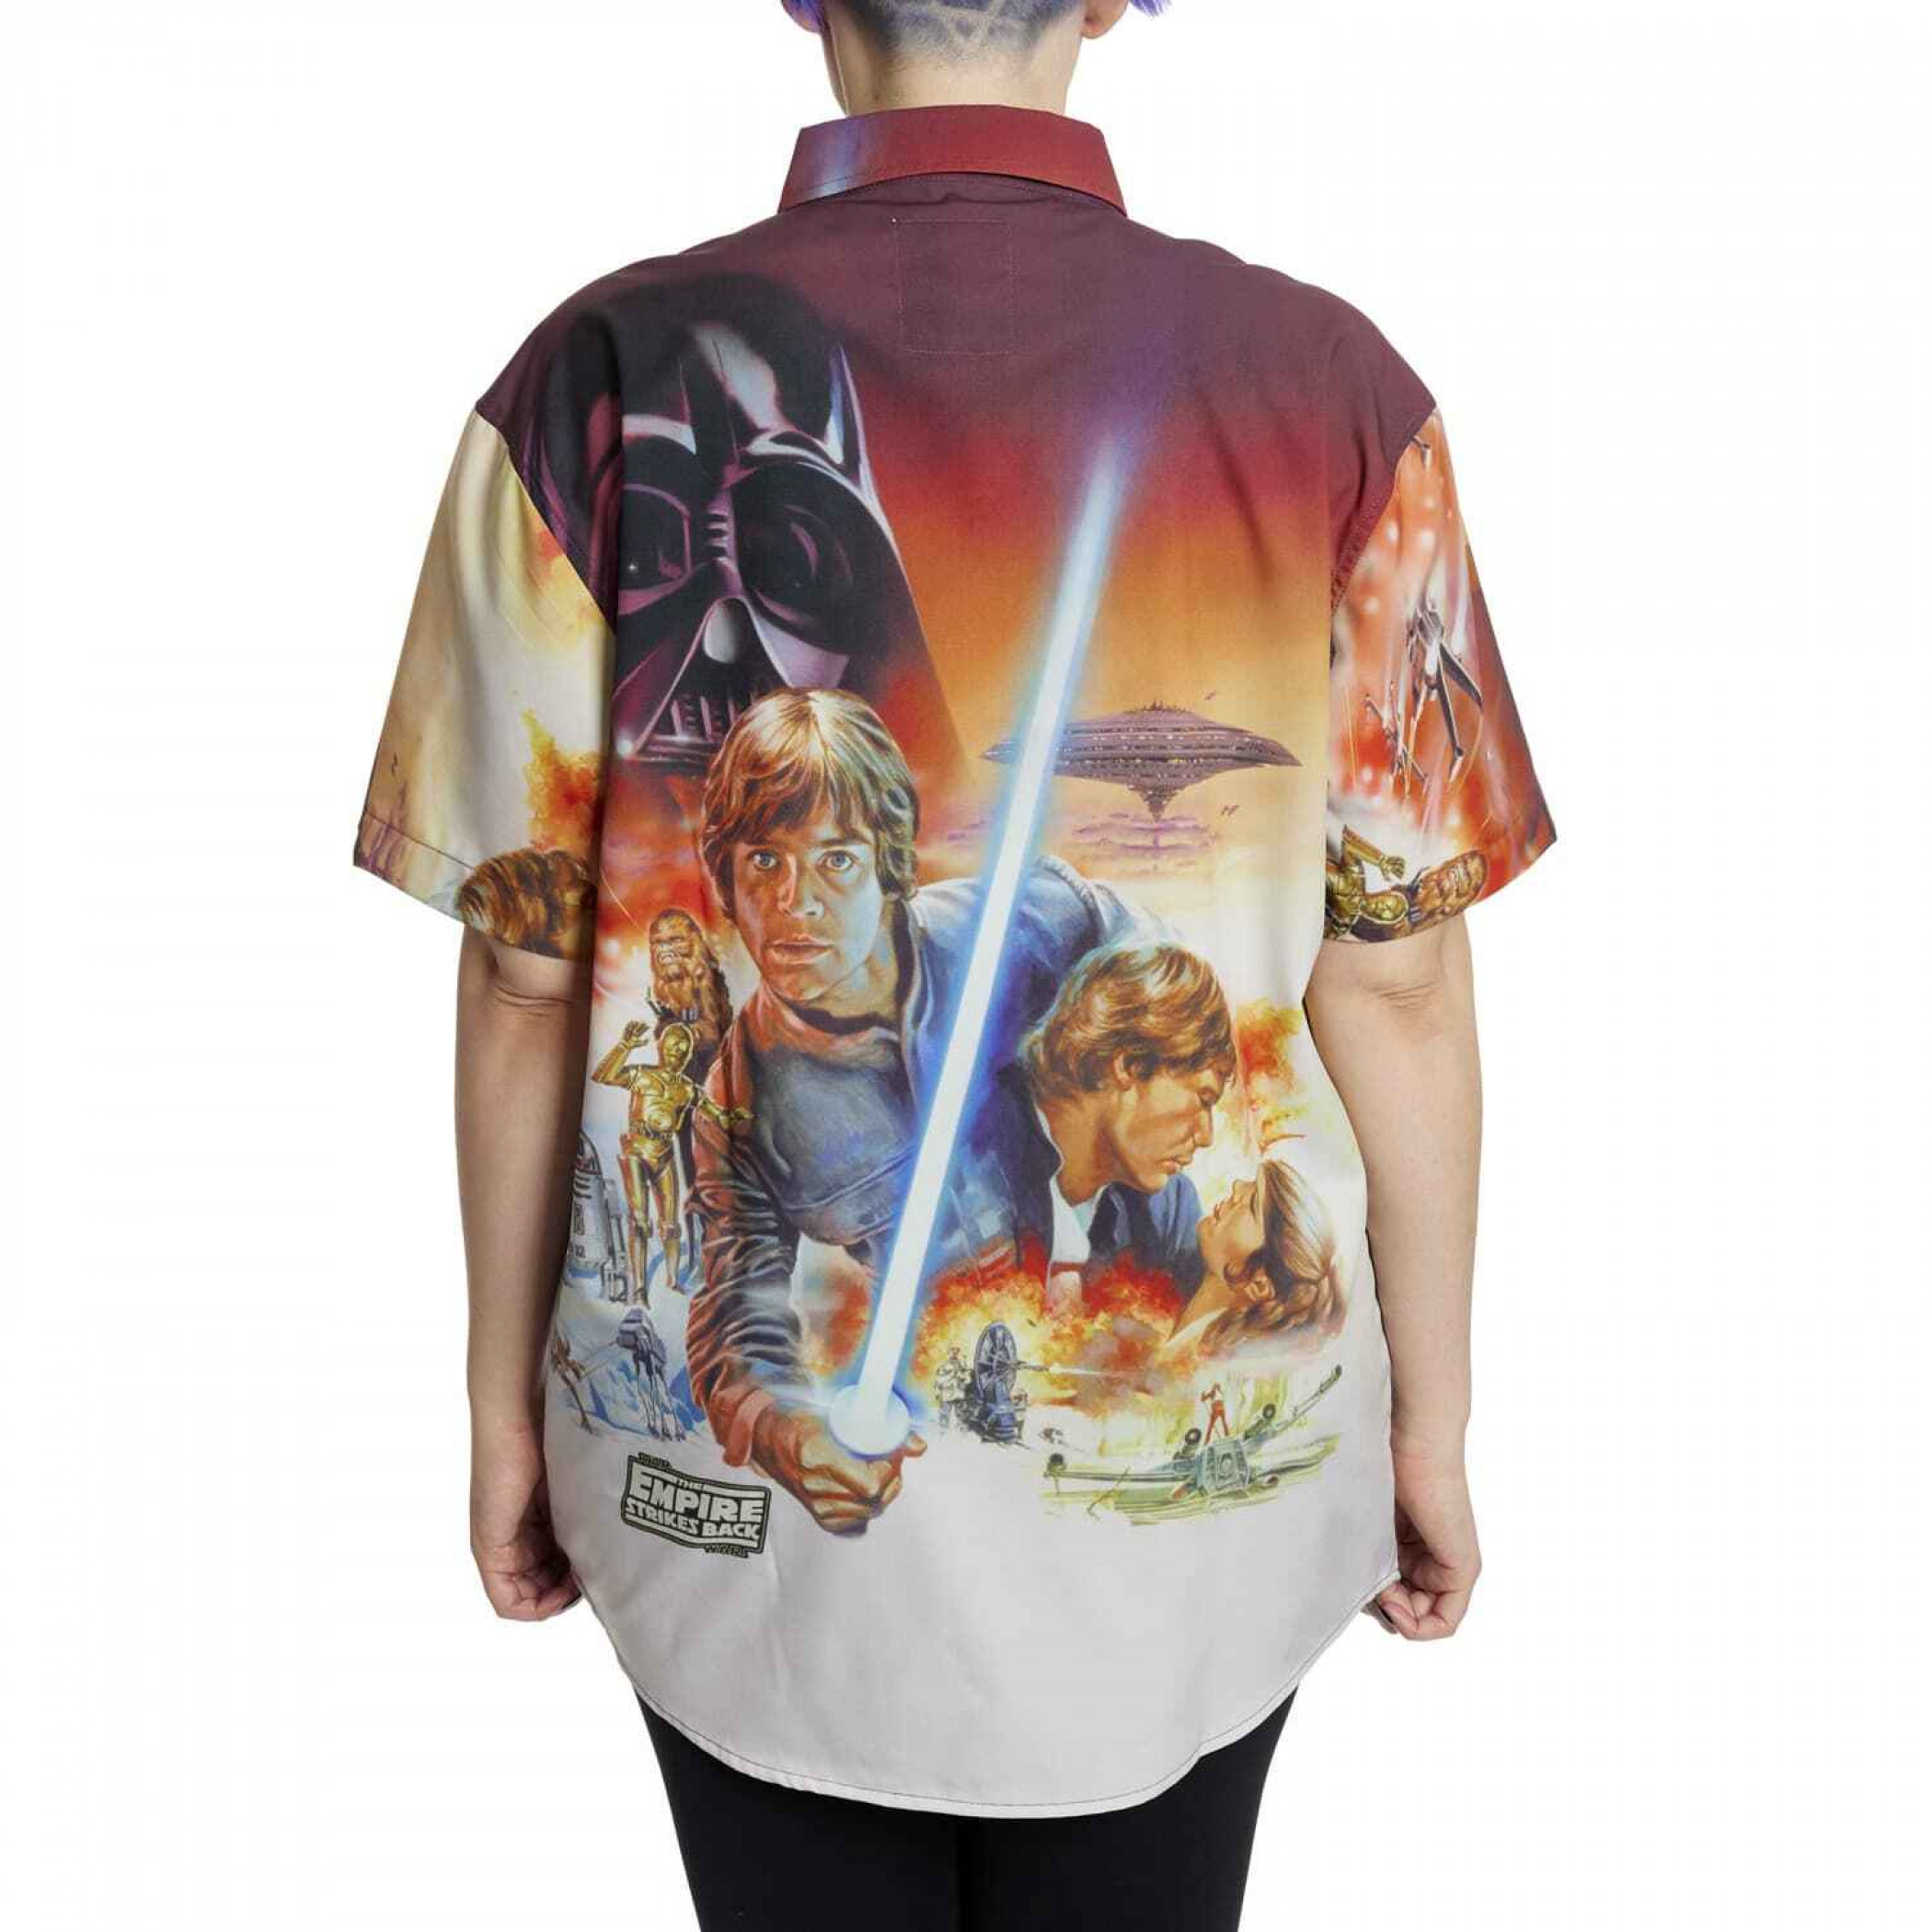 Star Wars Empire Strikes Back Poster Camp Shirt By Loungefly